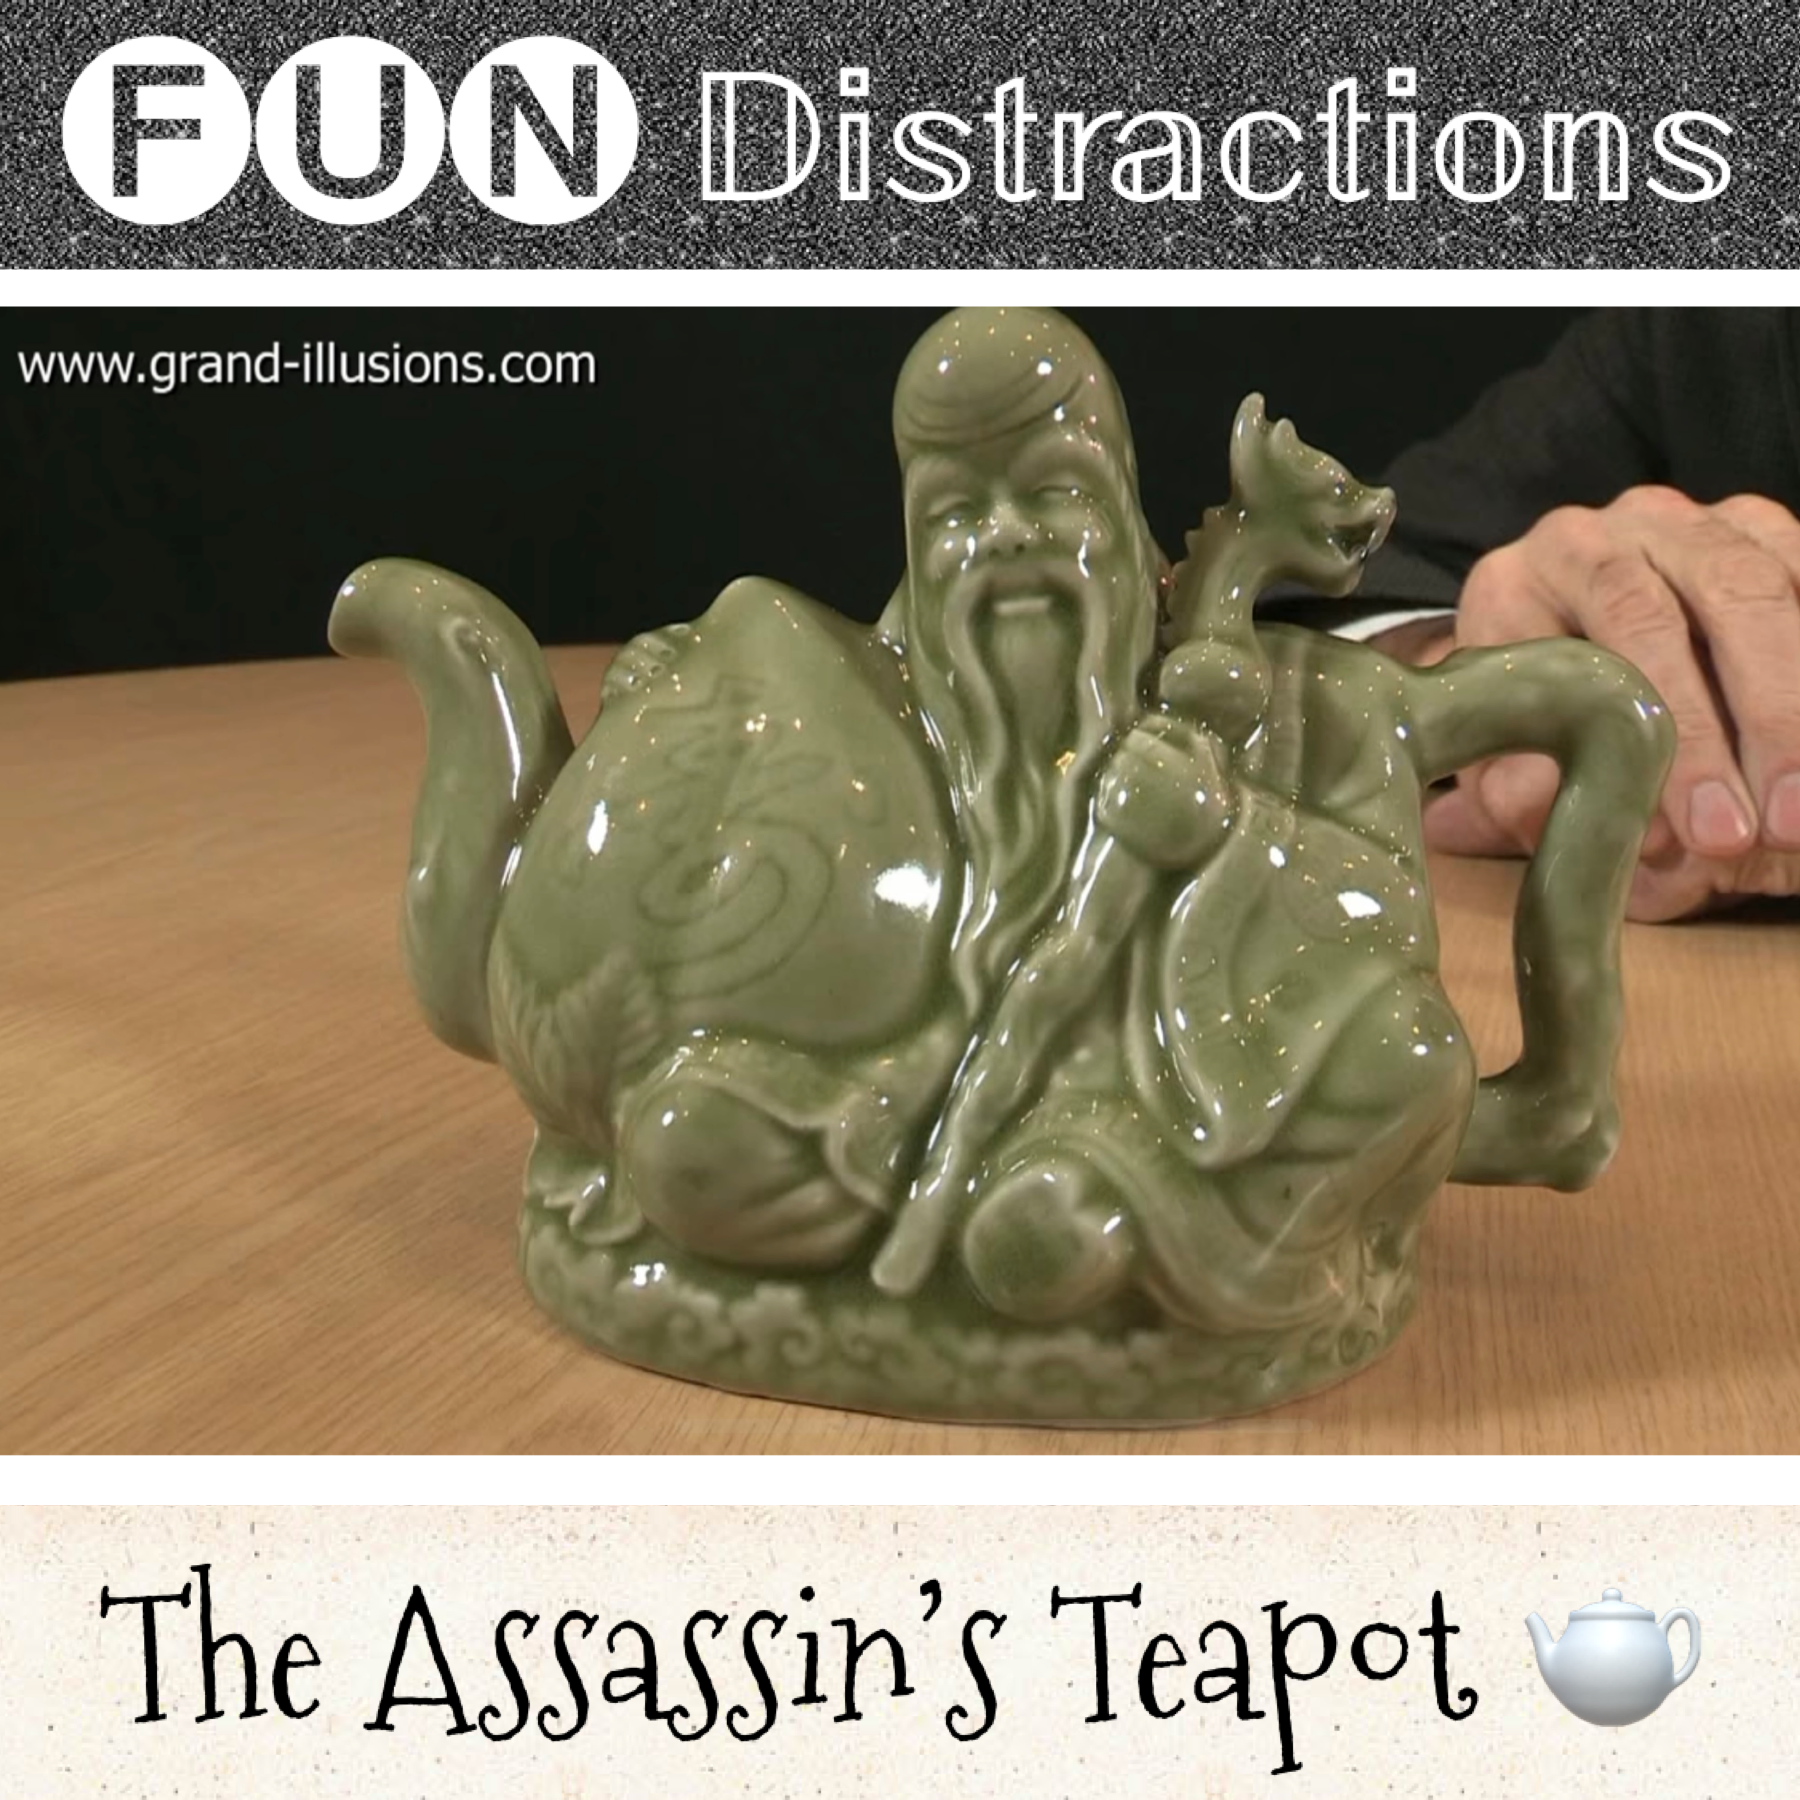 Image of a green, ornate Asian teapot